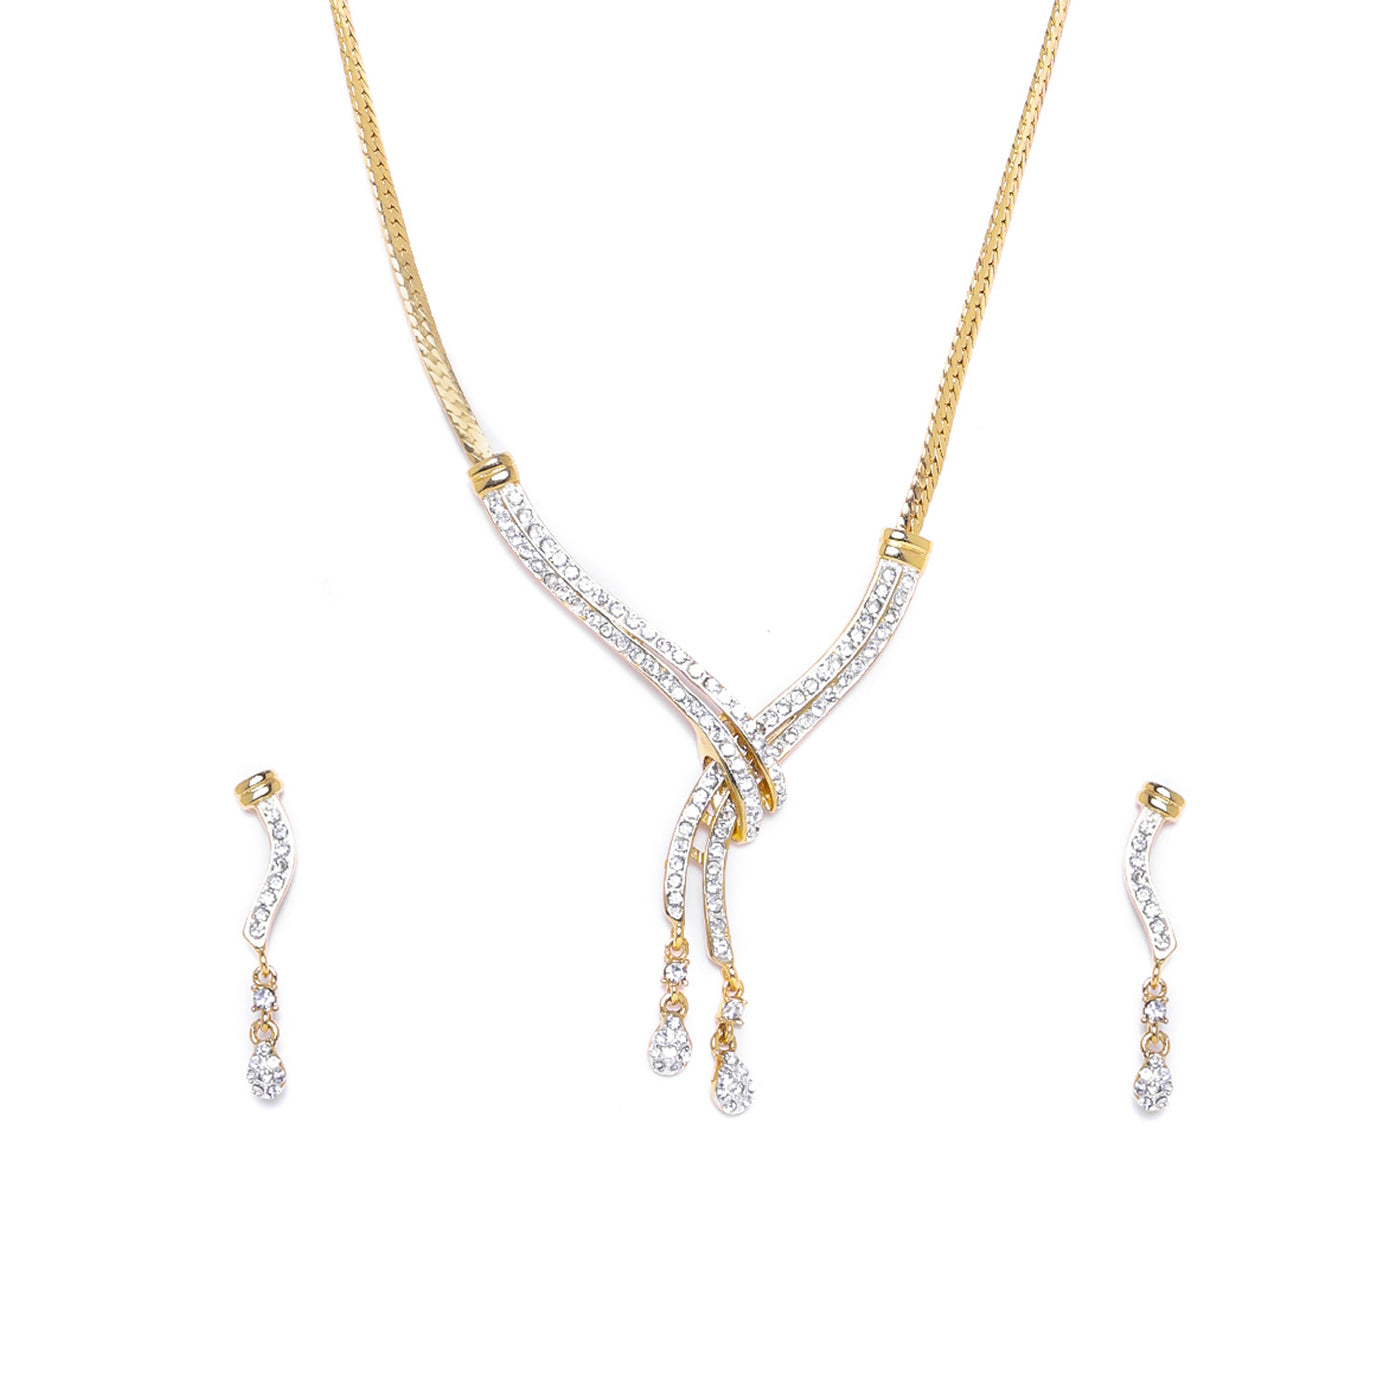 Estele - Stylish Gold and silver plated Classic Medley Necklace